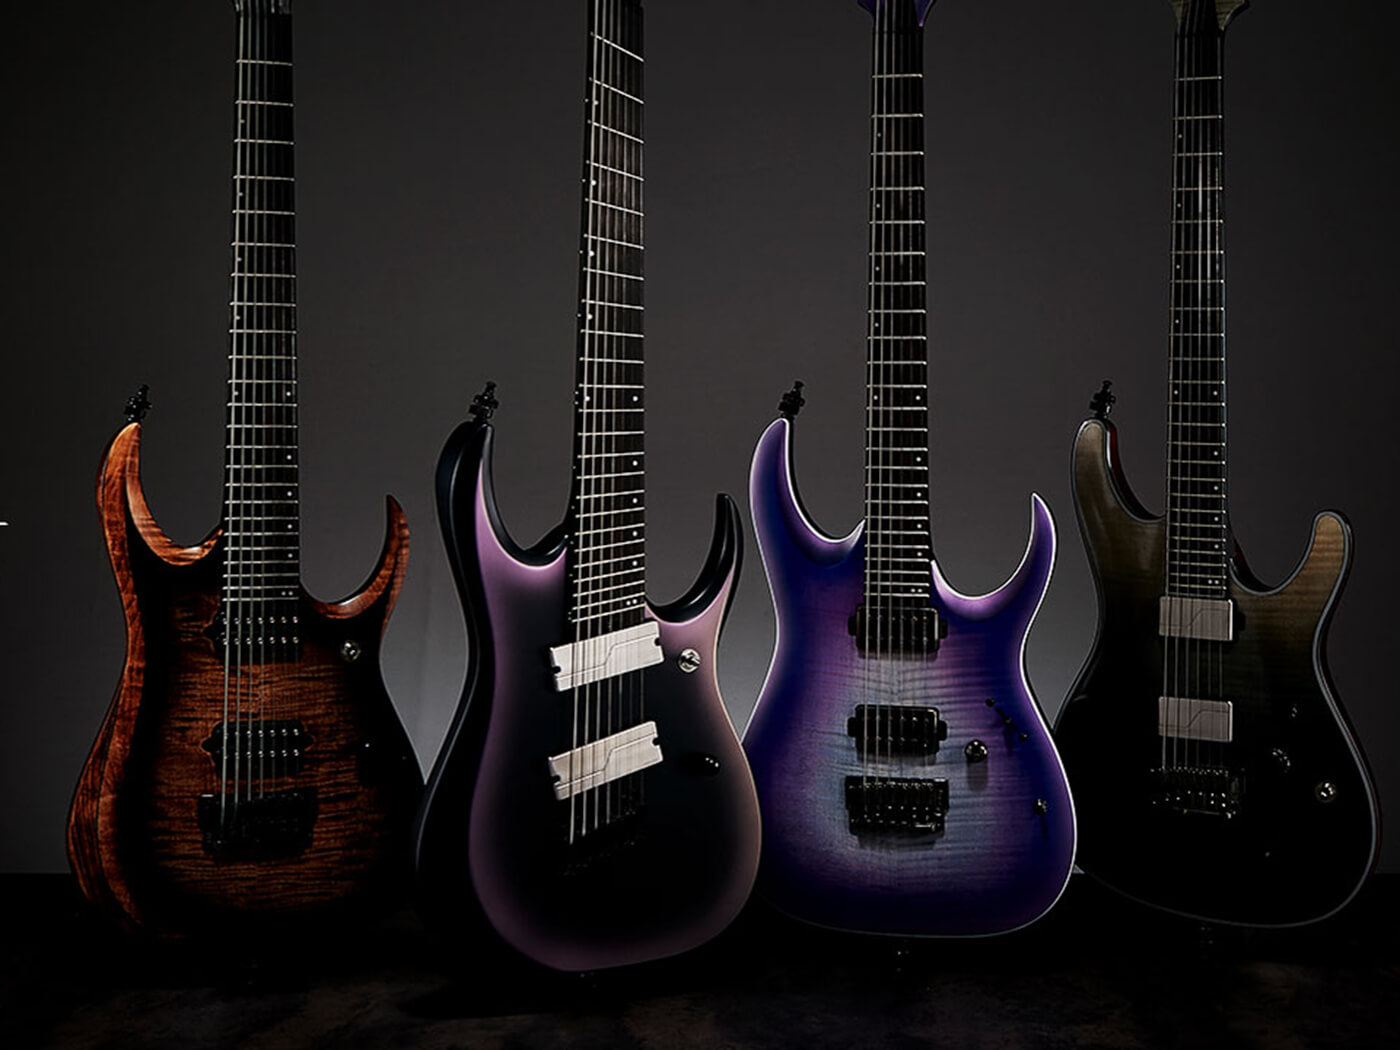 NAMM 2019: Ibanez reveals additions to acoustic and bass lines